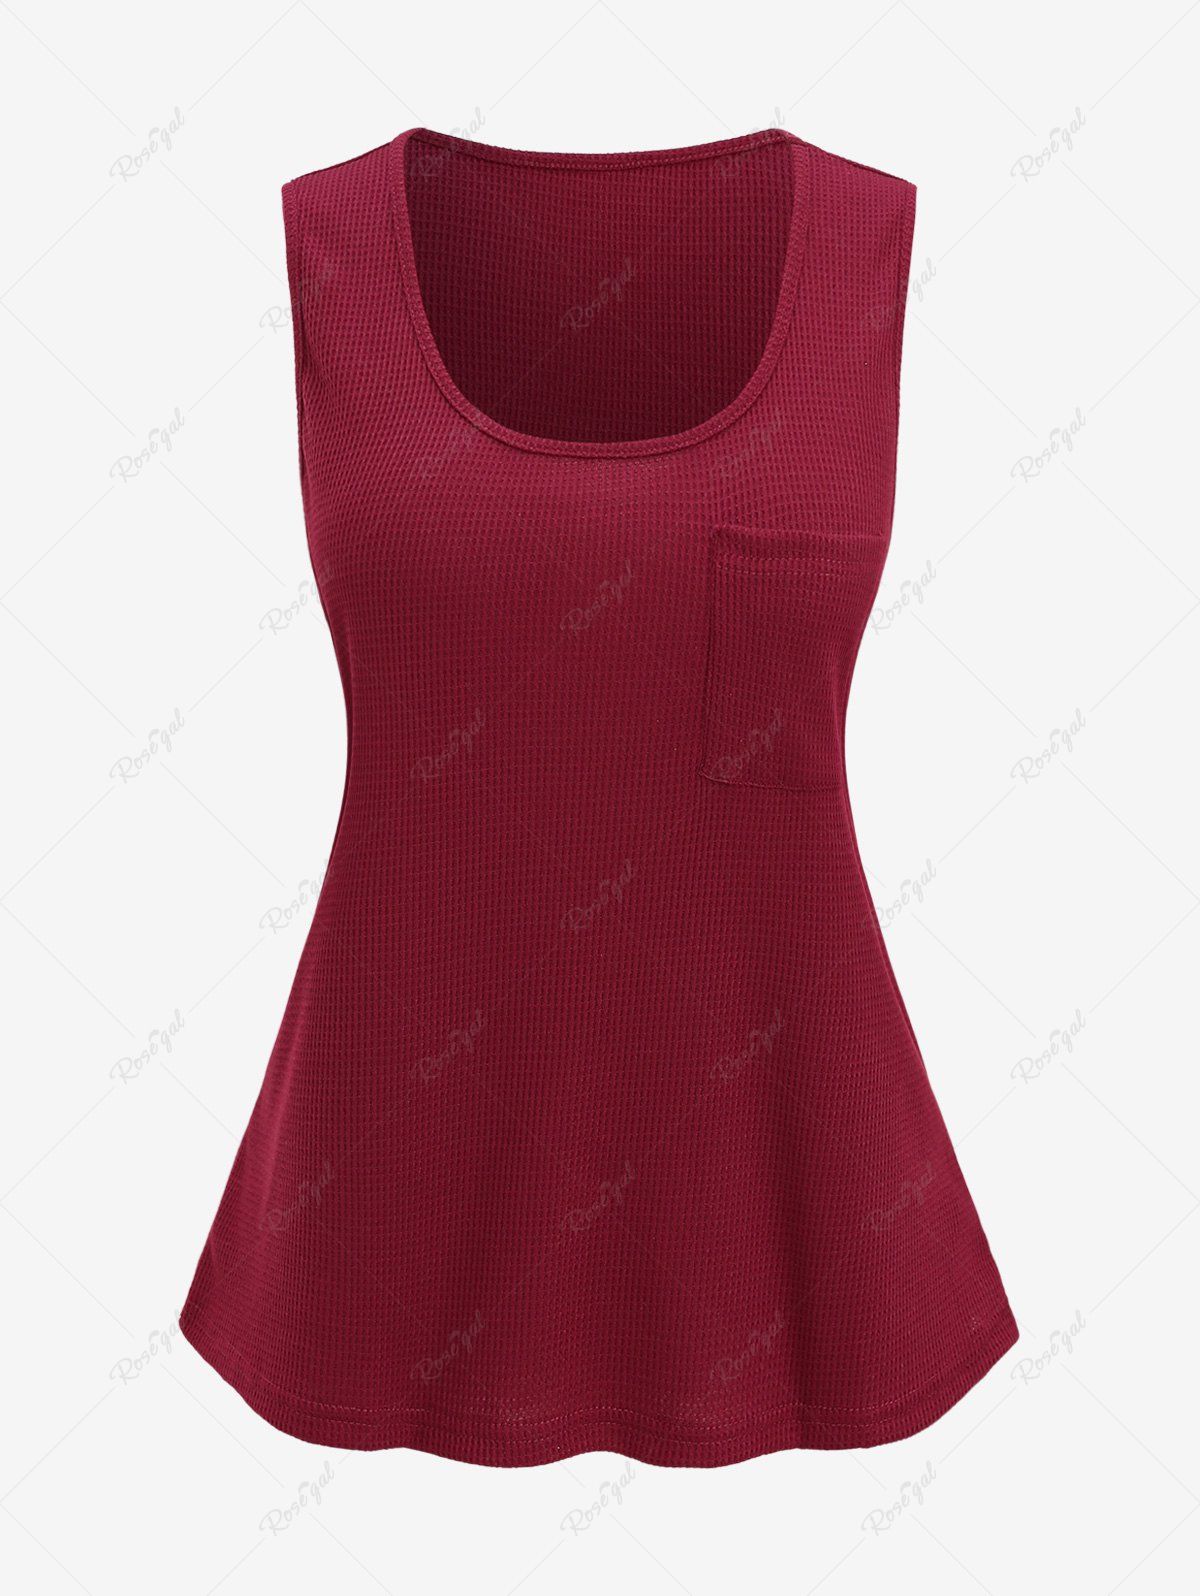 Fashion Plus Size Pocket Textured Solid Color Tank Top  